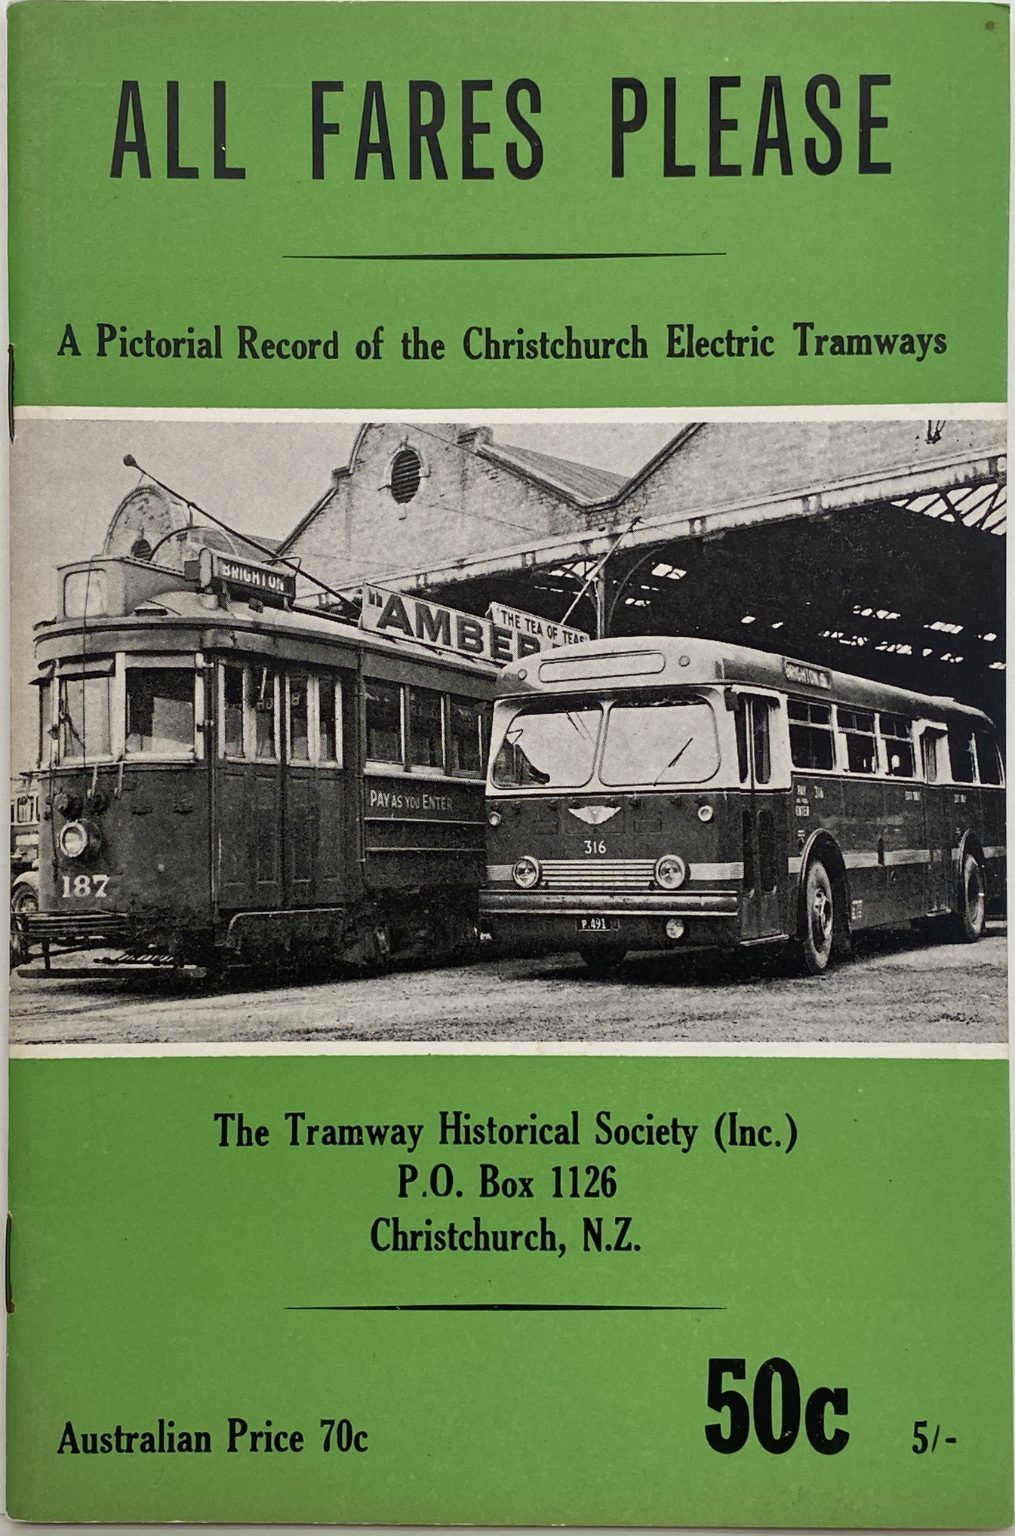 ALL FARES PLEASE A Pictorial Record of the Christchurch Electric Tramways